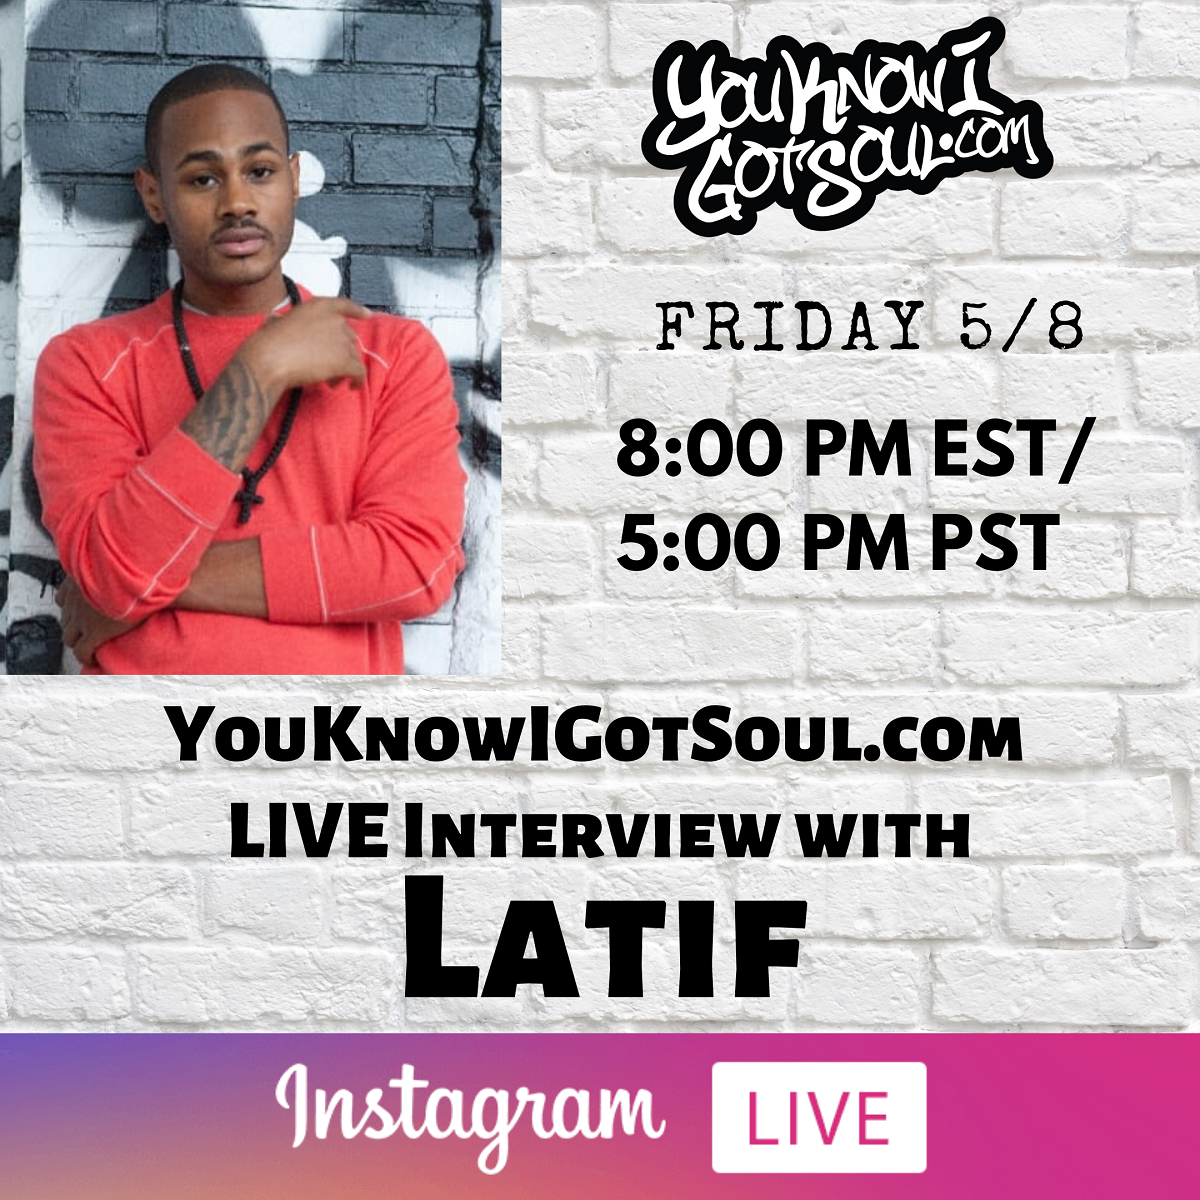 Corey "Latif" Williams Talks Lo Boii, Songwriting For Others, Working with Ryan Leslie (Exclusive)